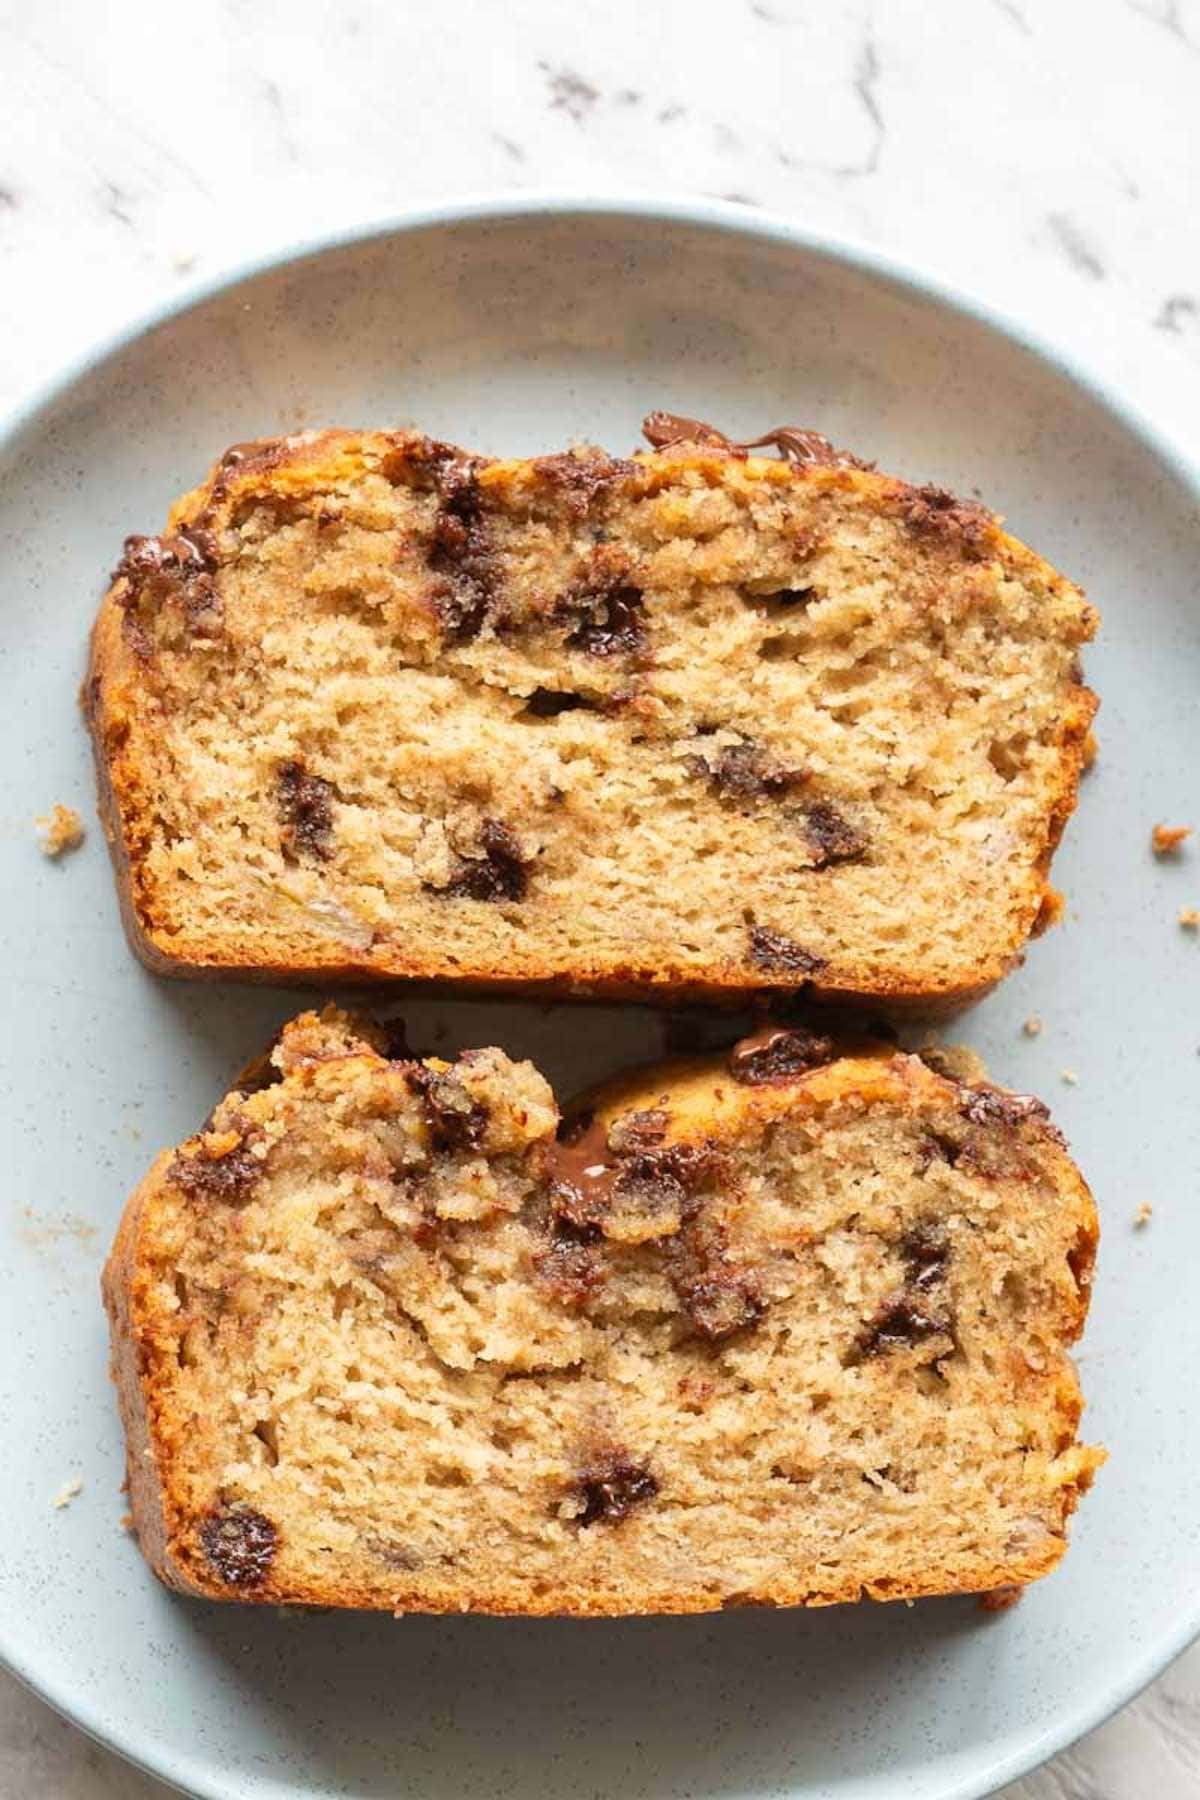 How to make banana bread with almond flour.